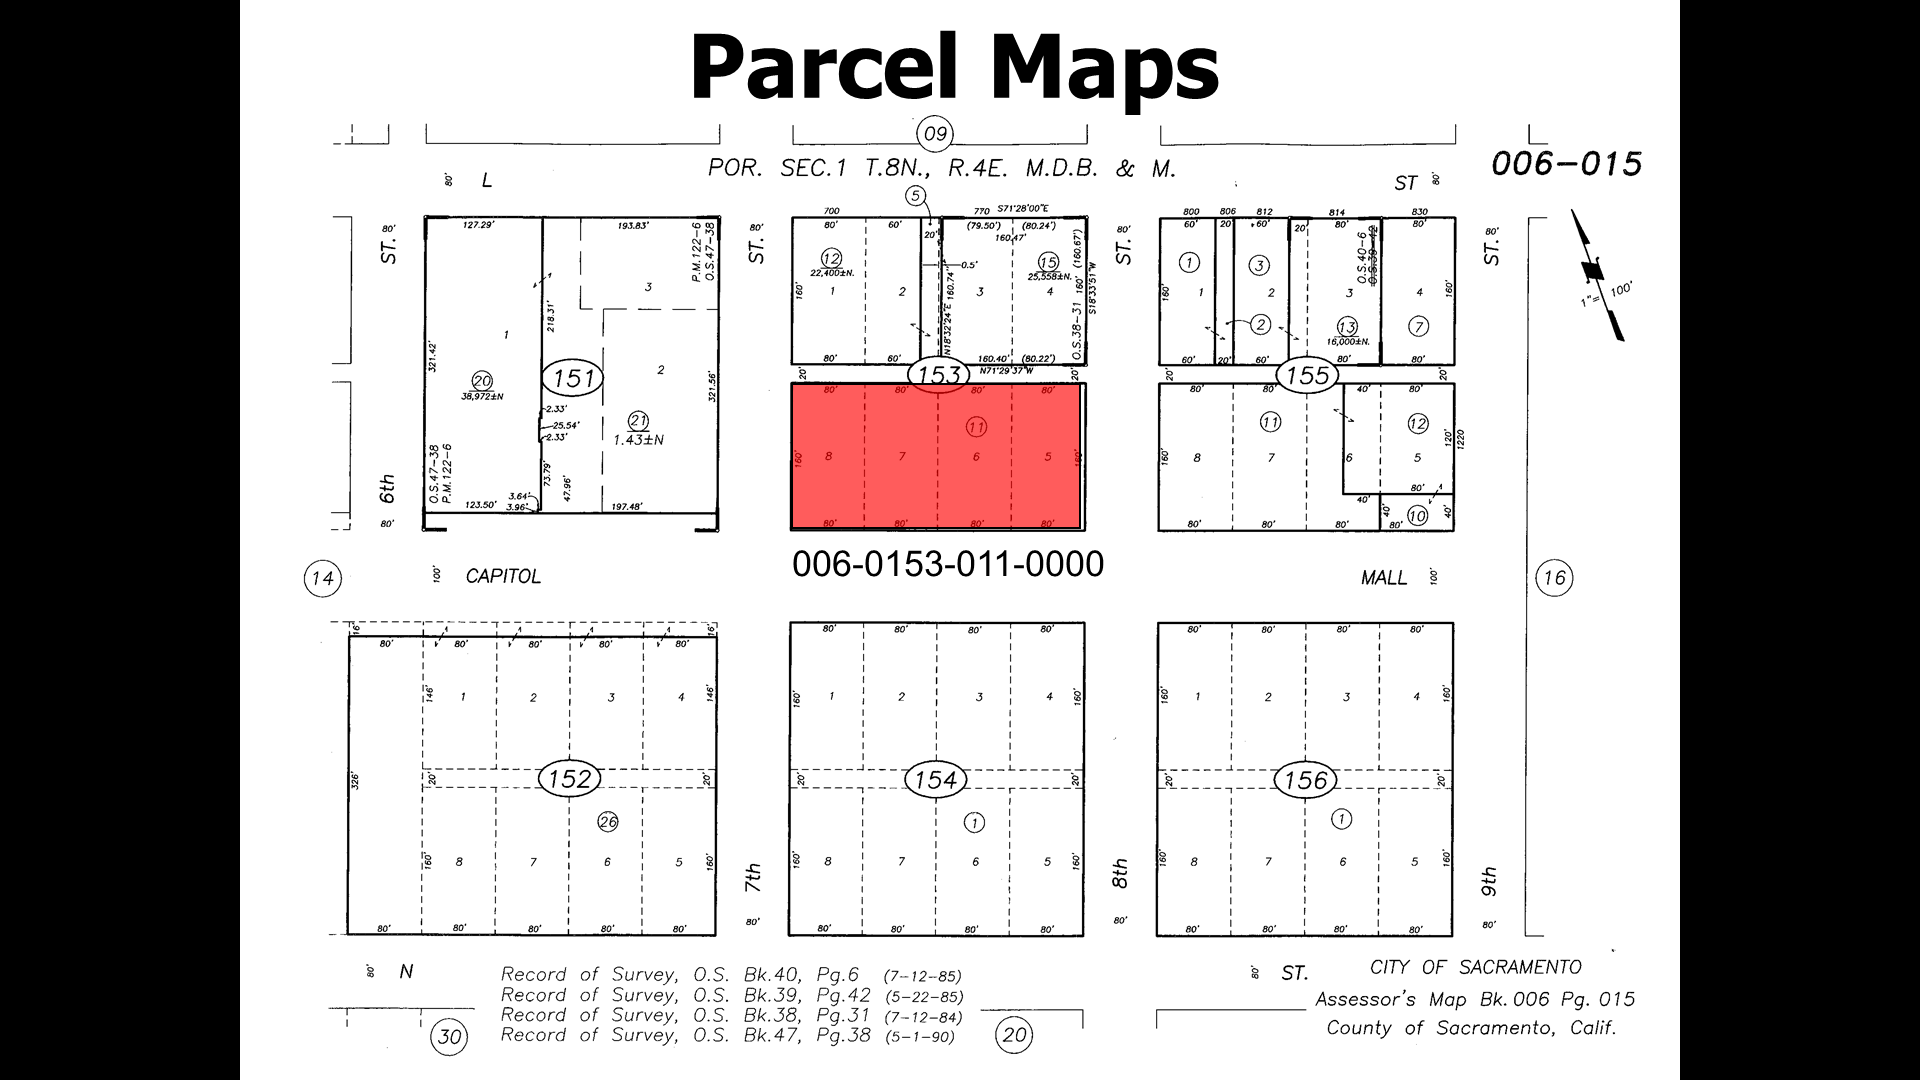 Examplel of Parcel <aps image